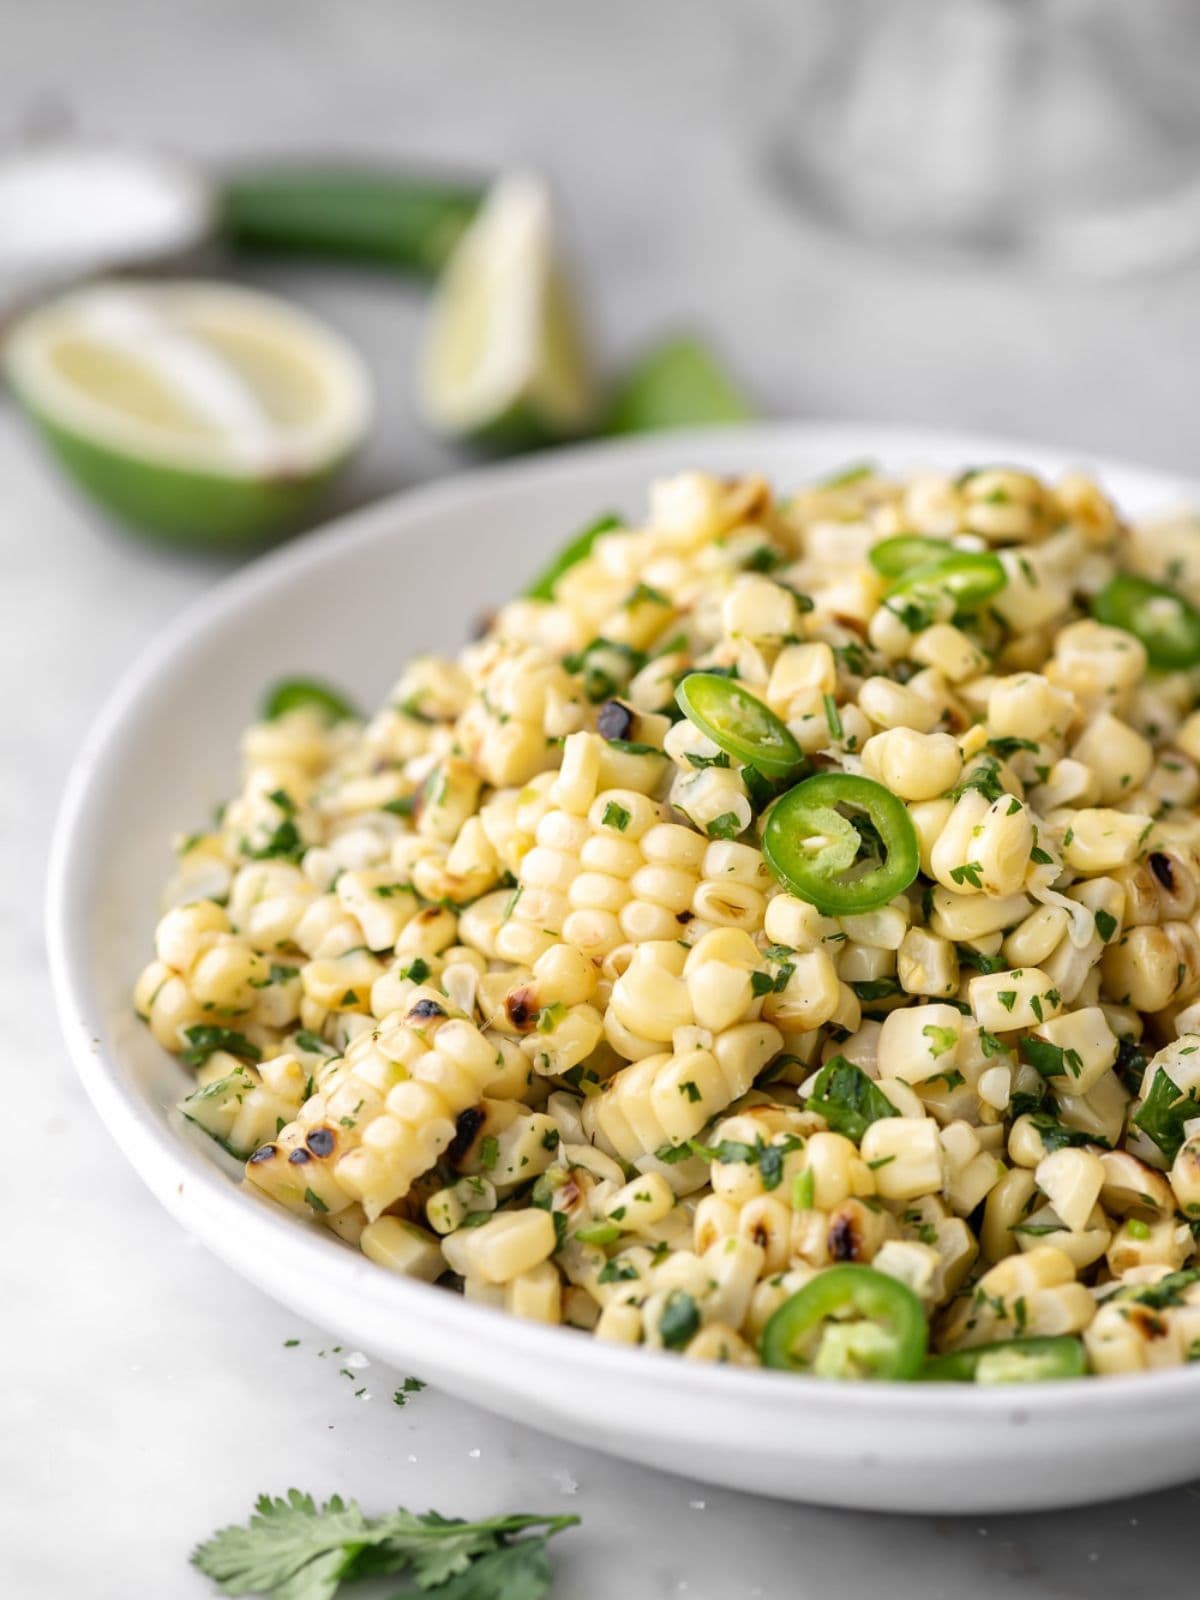 Corn salad with serrano peppers in a white bowl and lime in the background